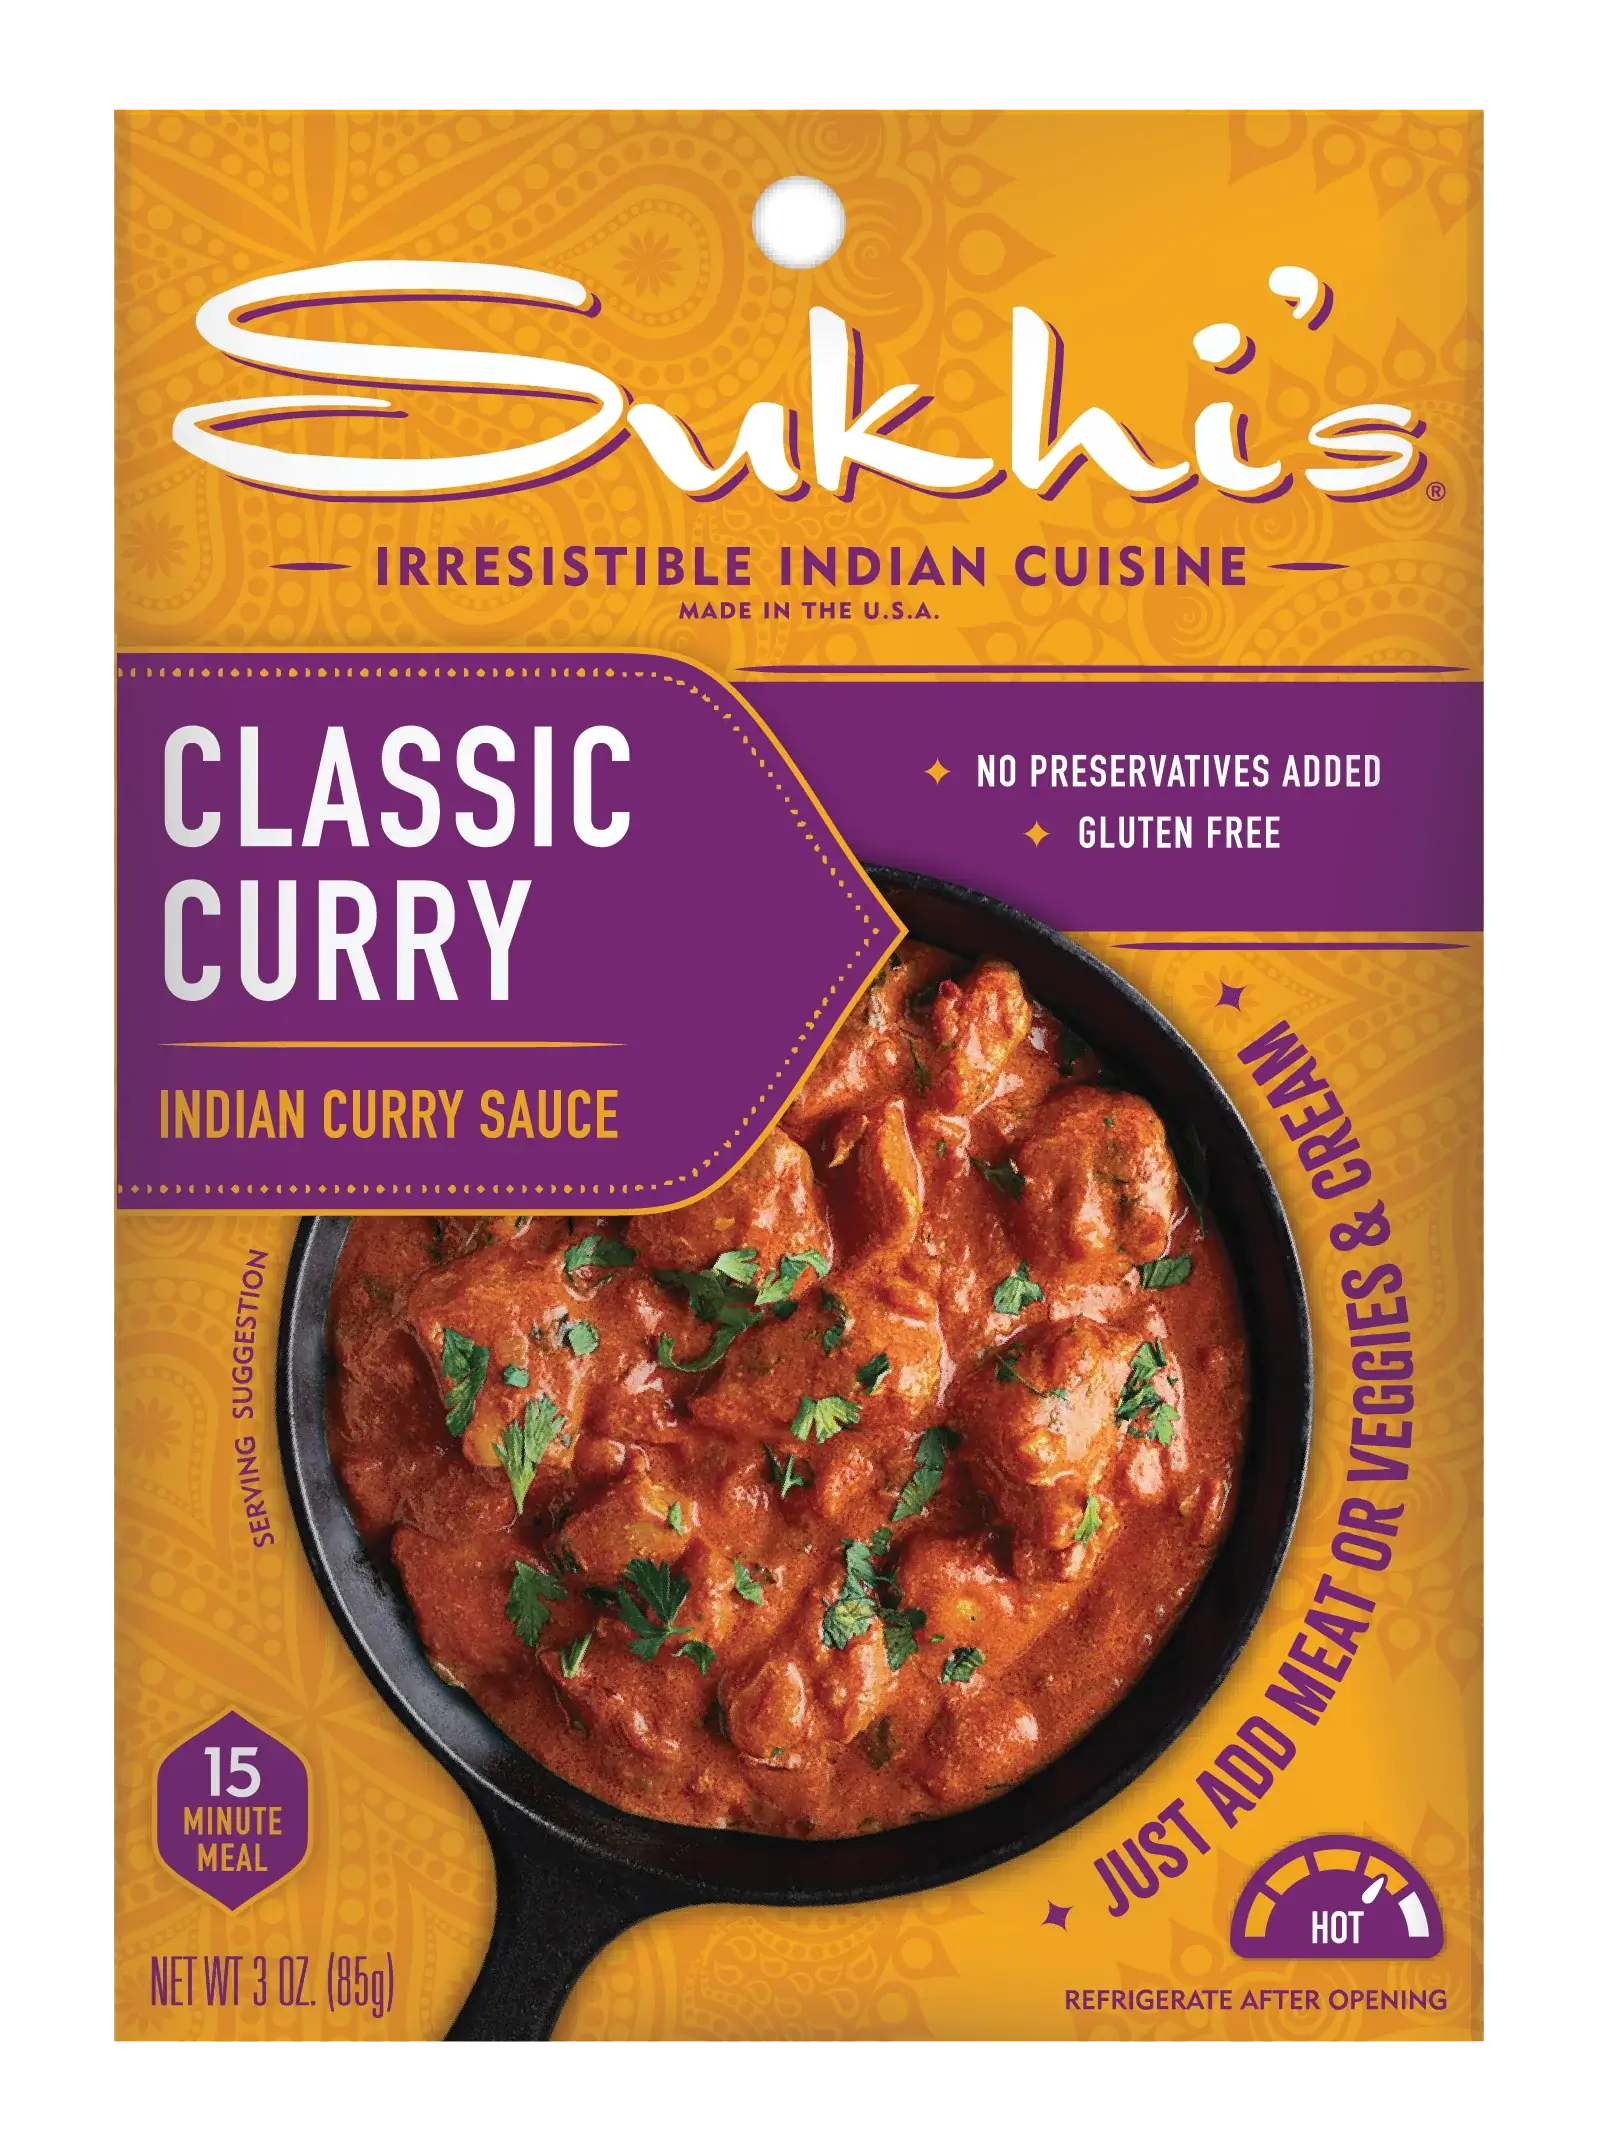 Classic Curry Indian Curry Sauce